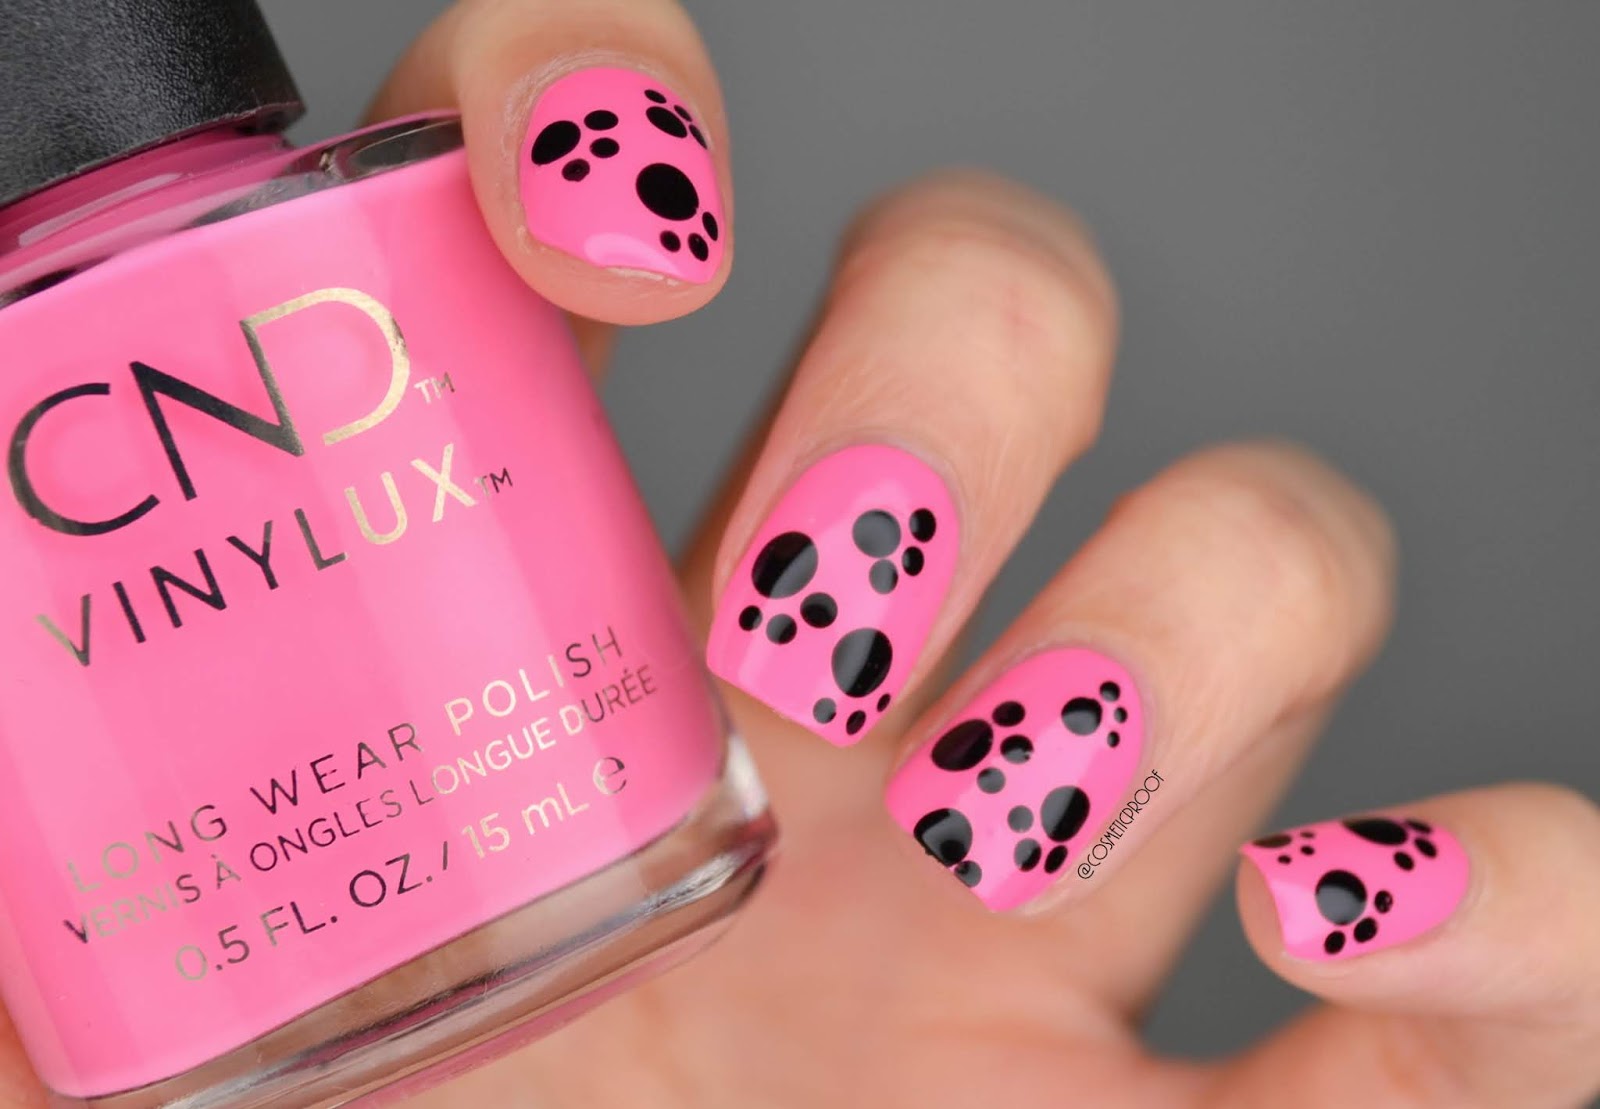 7. Cool Paw Print Gradient - wide 5